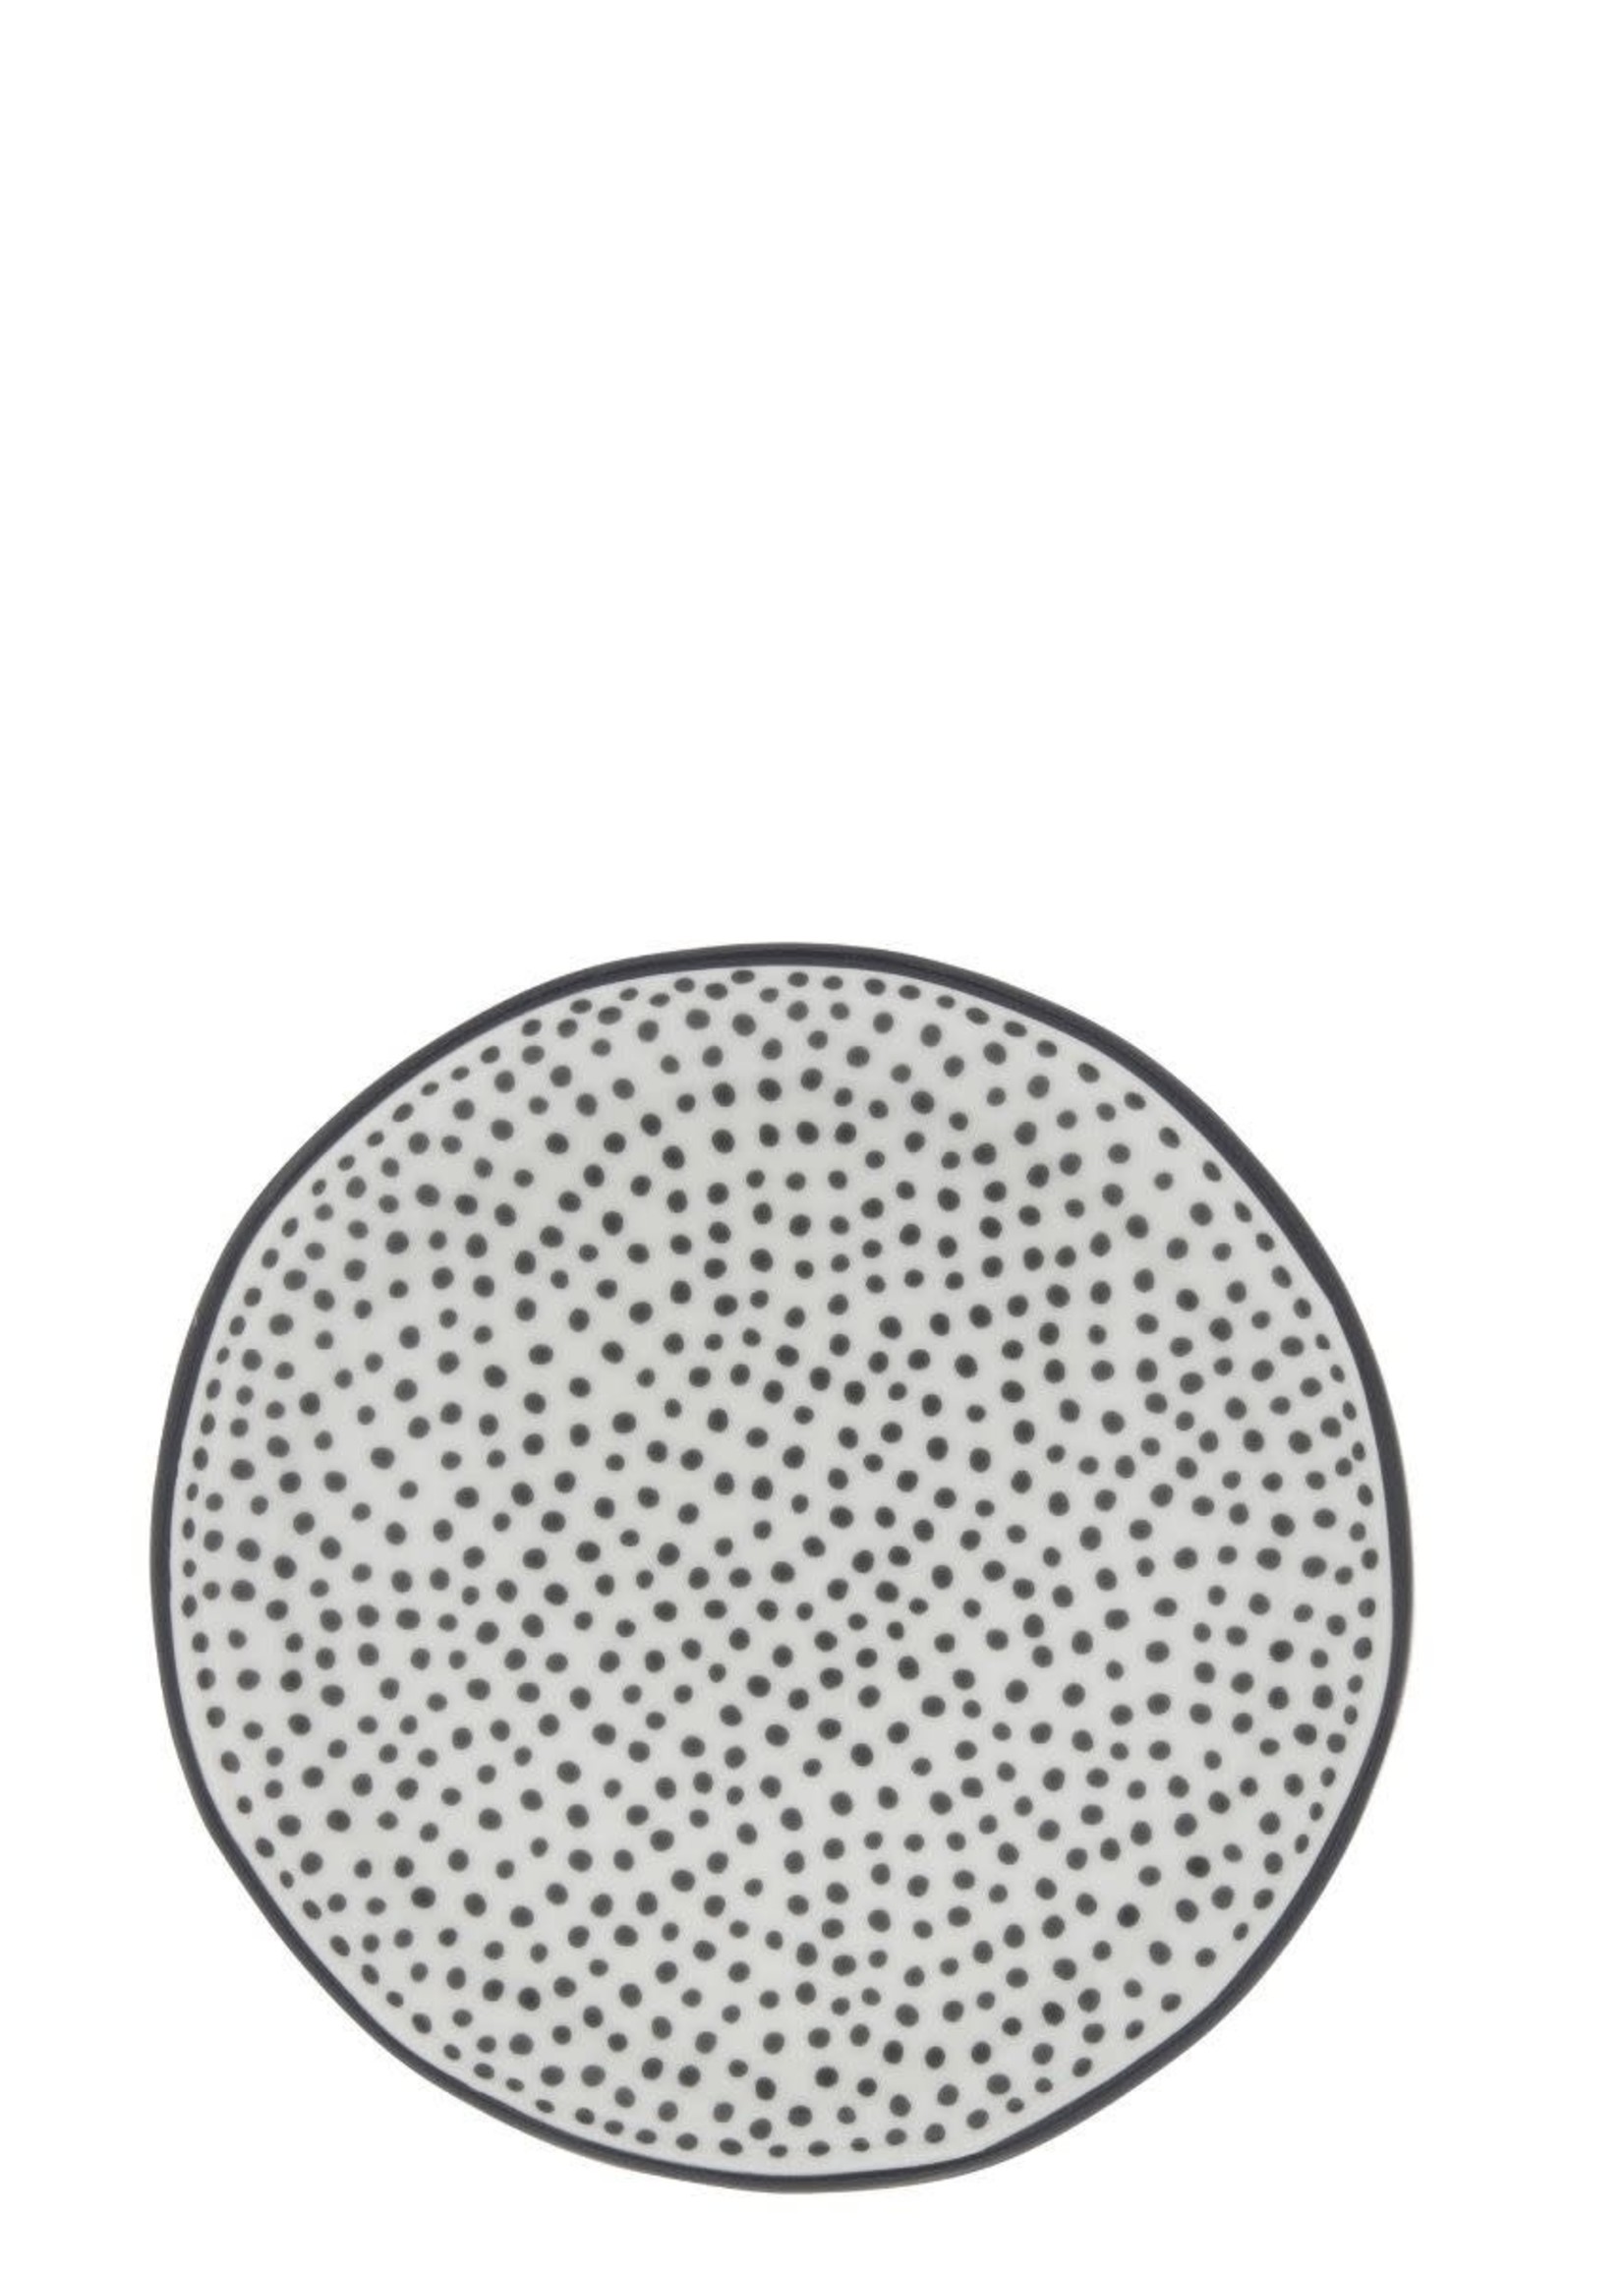 BASTION COLLECTIONS Cake plate 16cm white/little dots in black